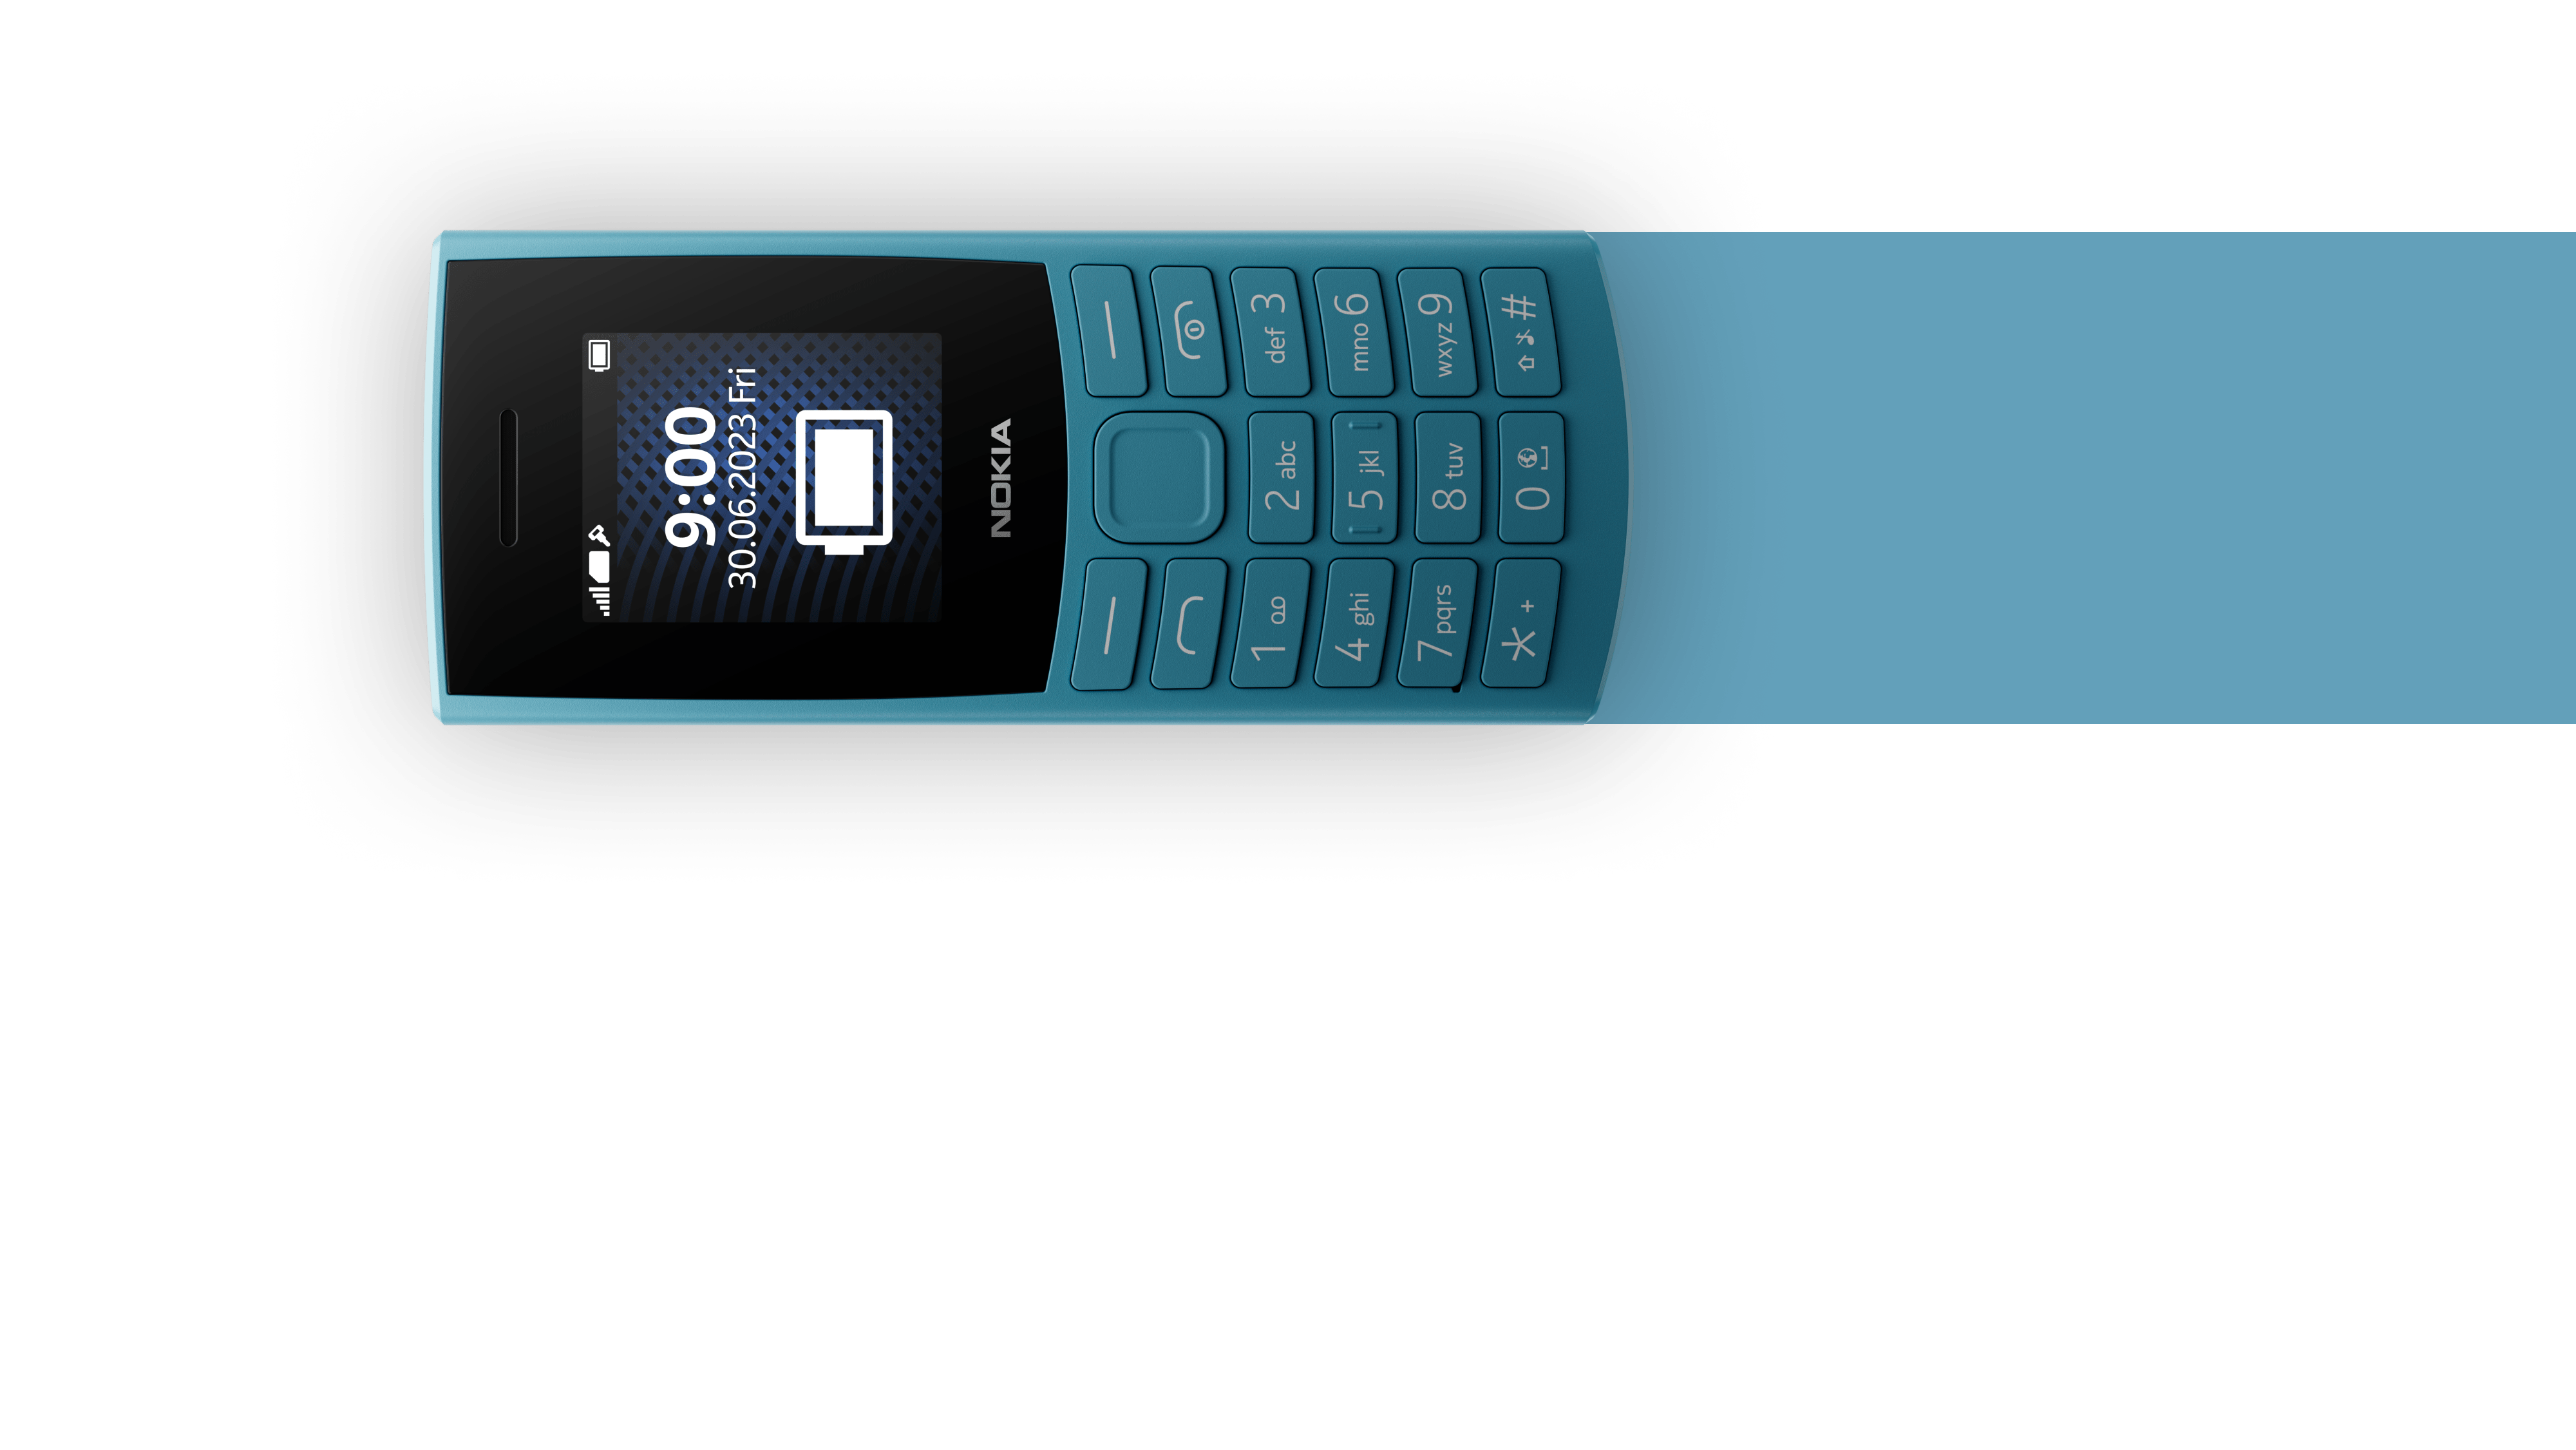 Nokia 105 with phone 4G internet feature